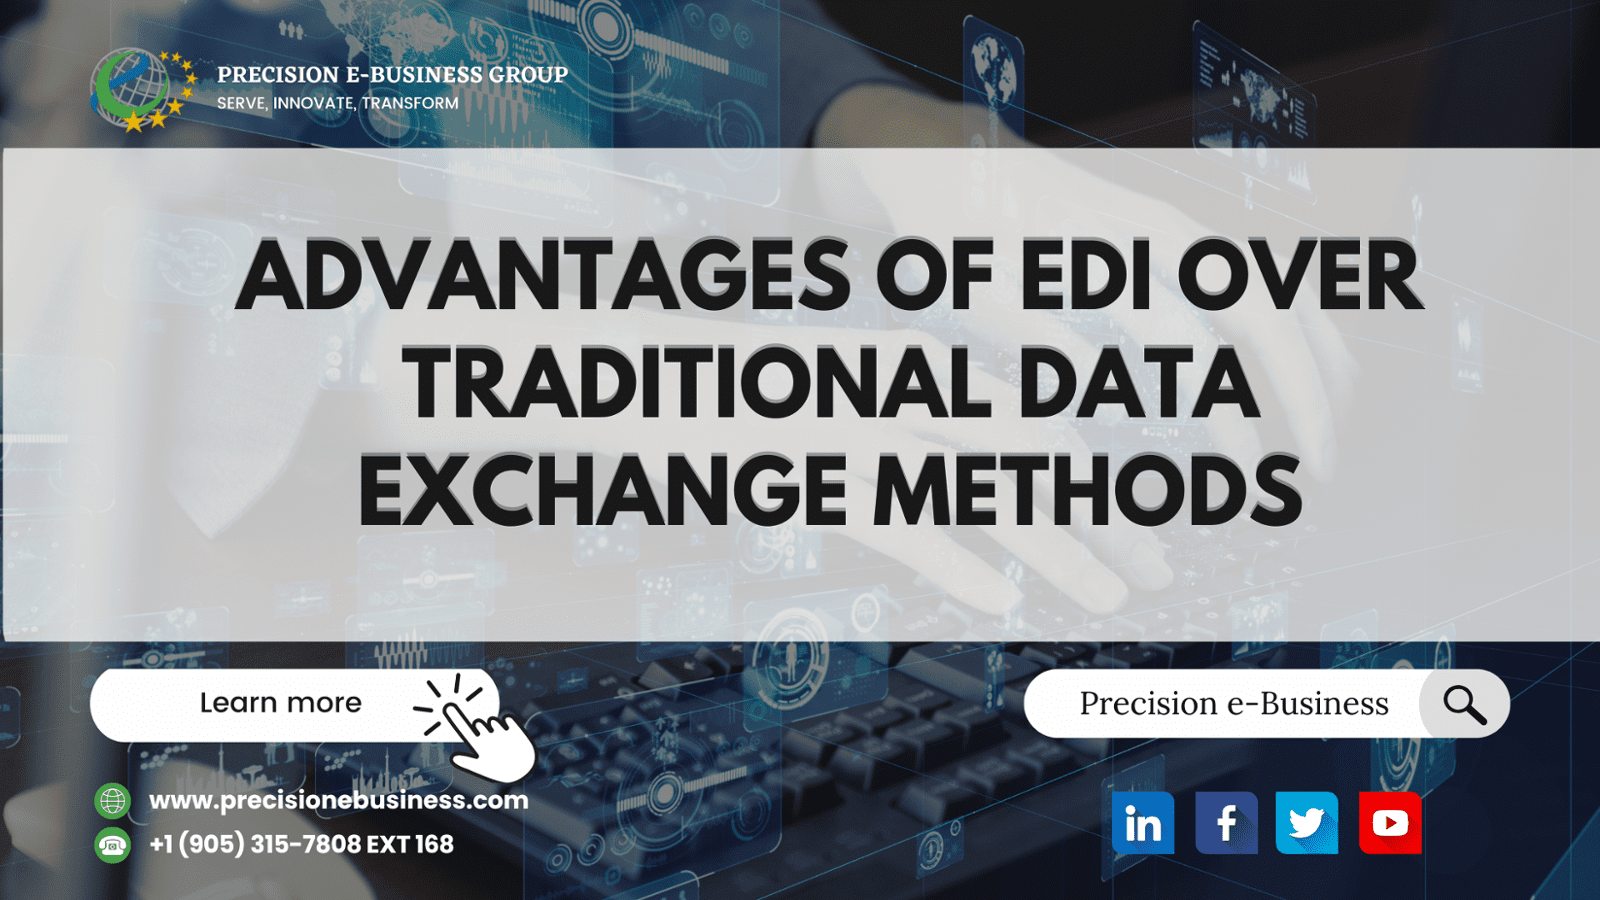 The Advantages of EDI over Traditional Data Exchange Methods